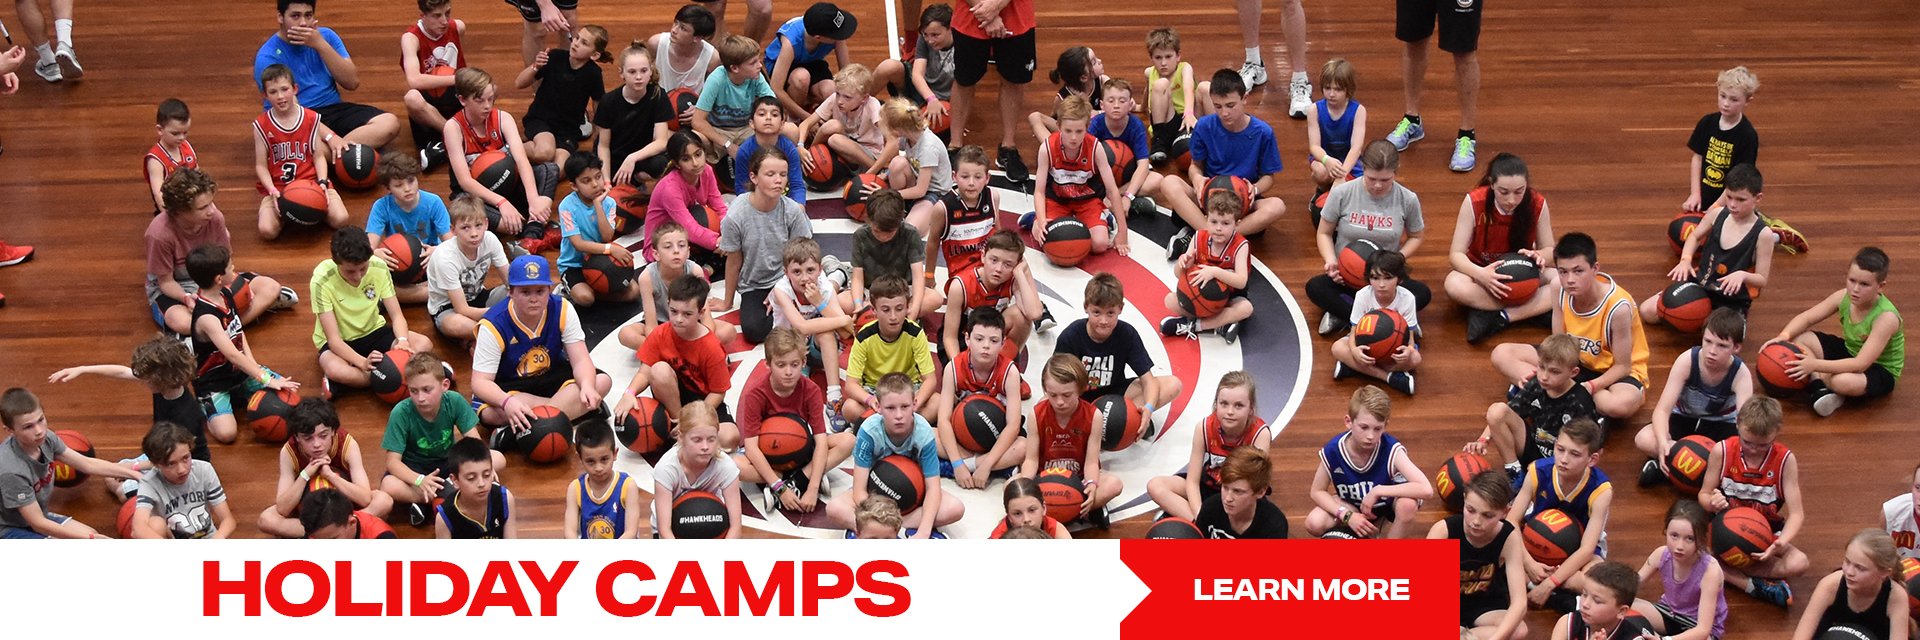 Holiday Camps Tab